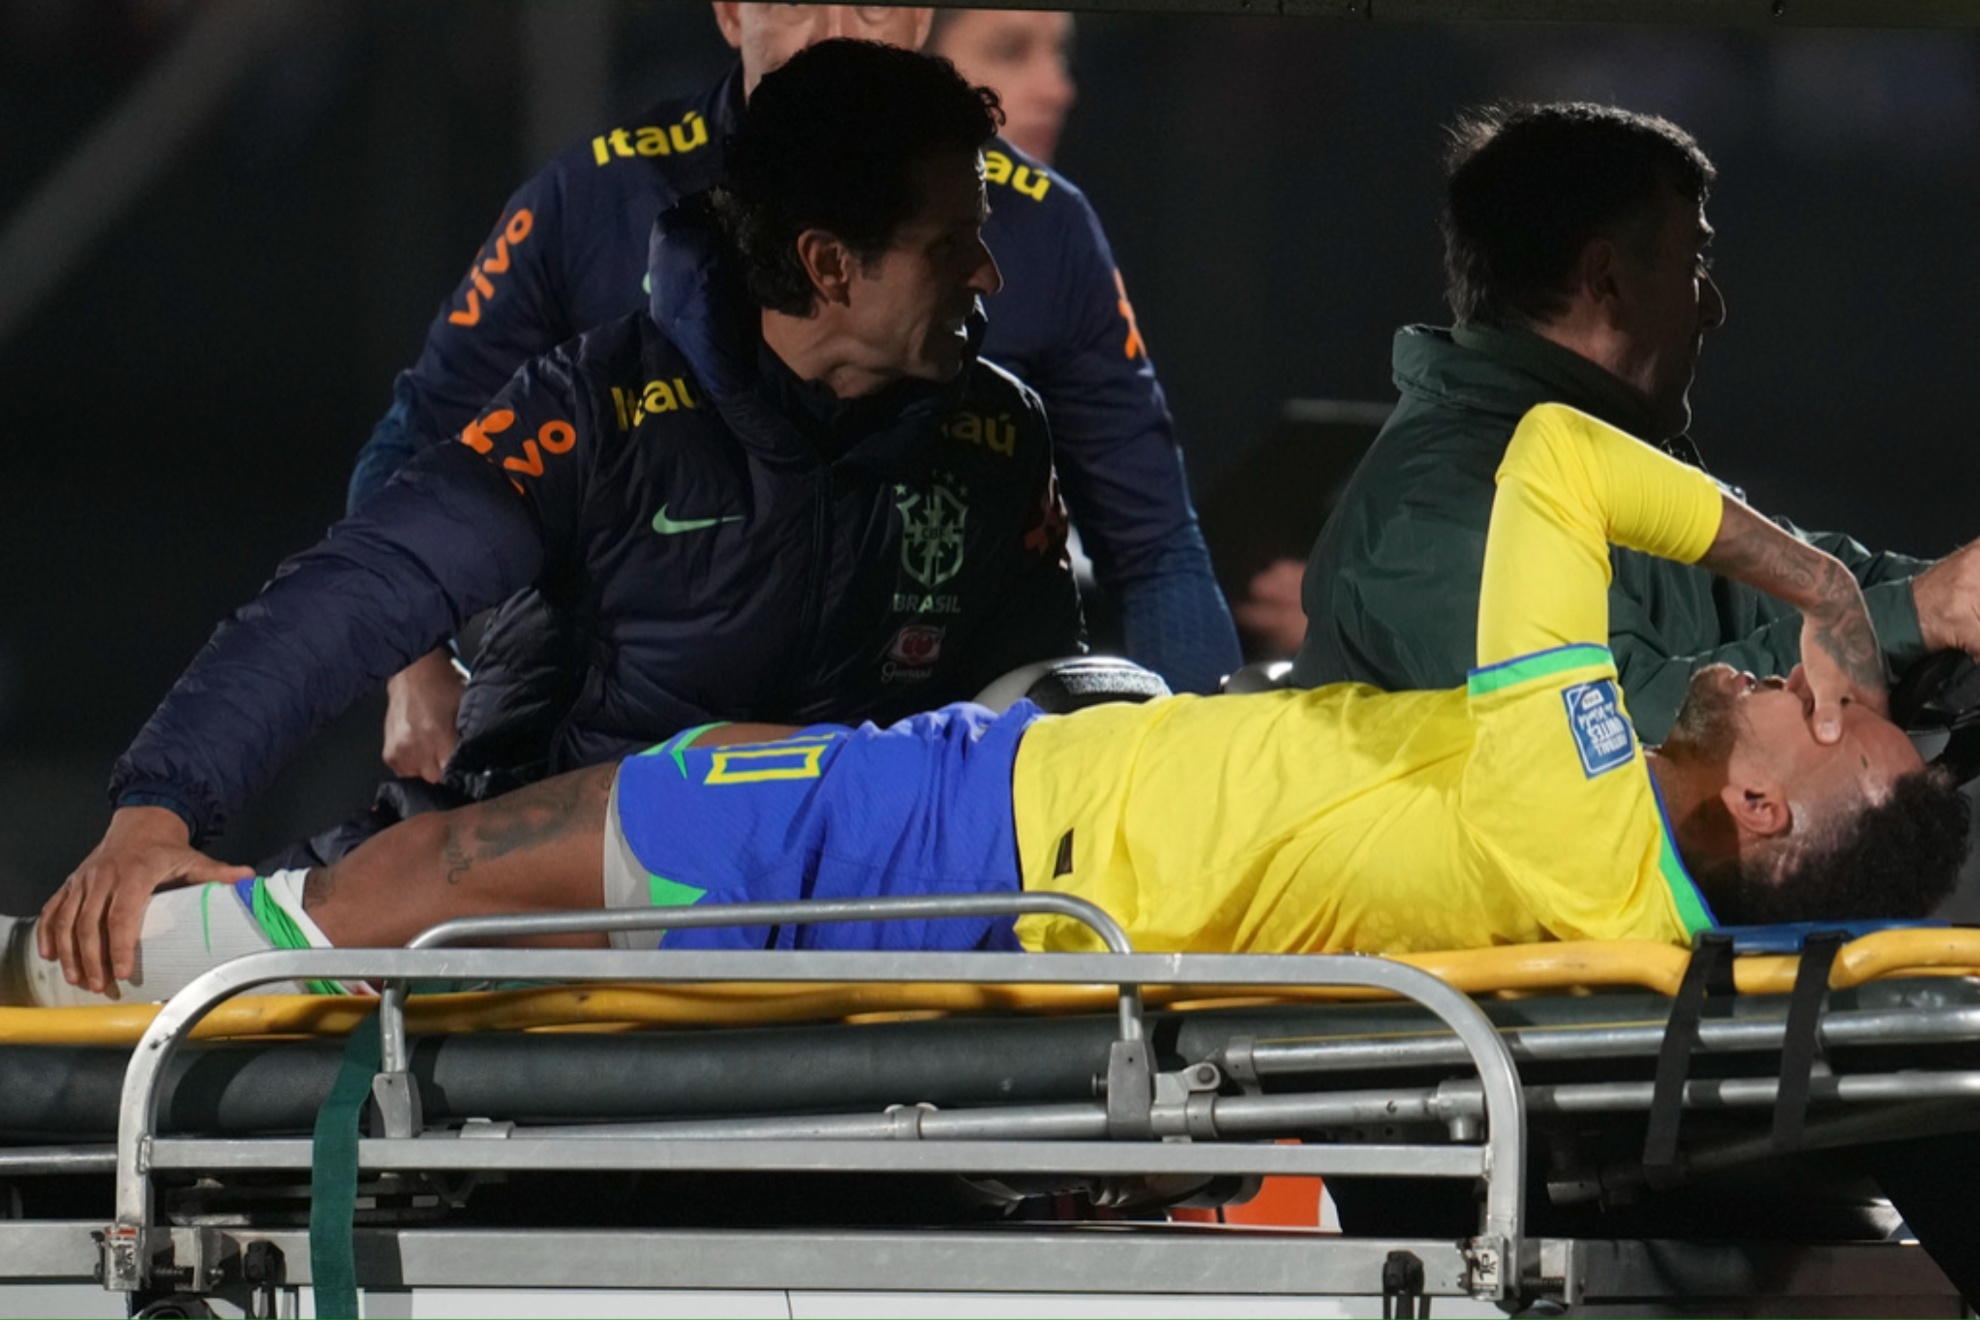 Neymar Jr. suffered an apparent knee injury against Uruguay on Tuesday